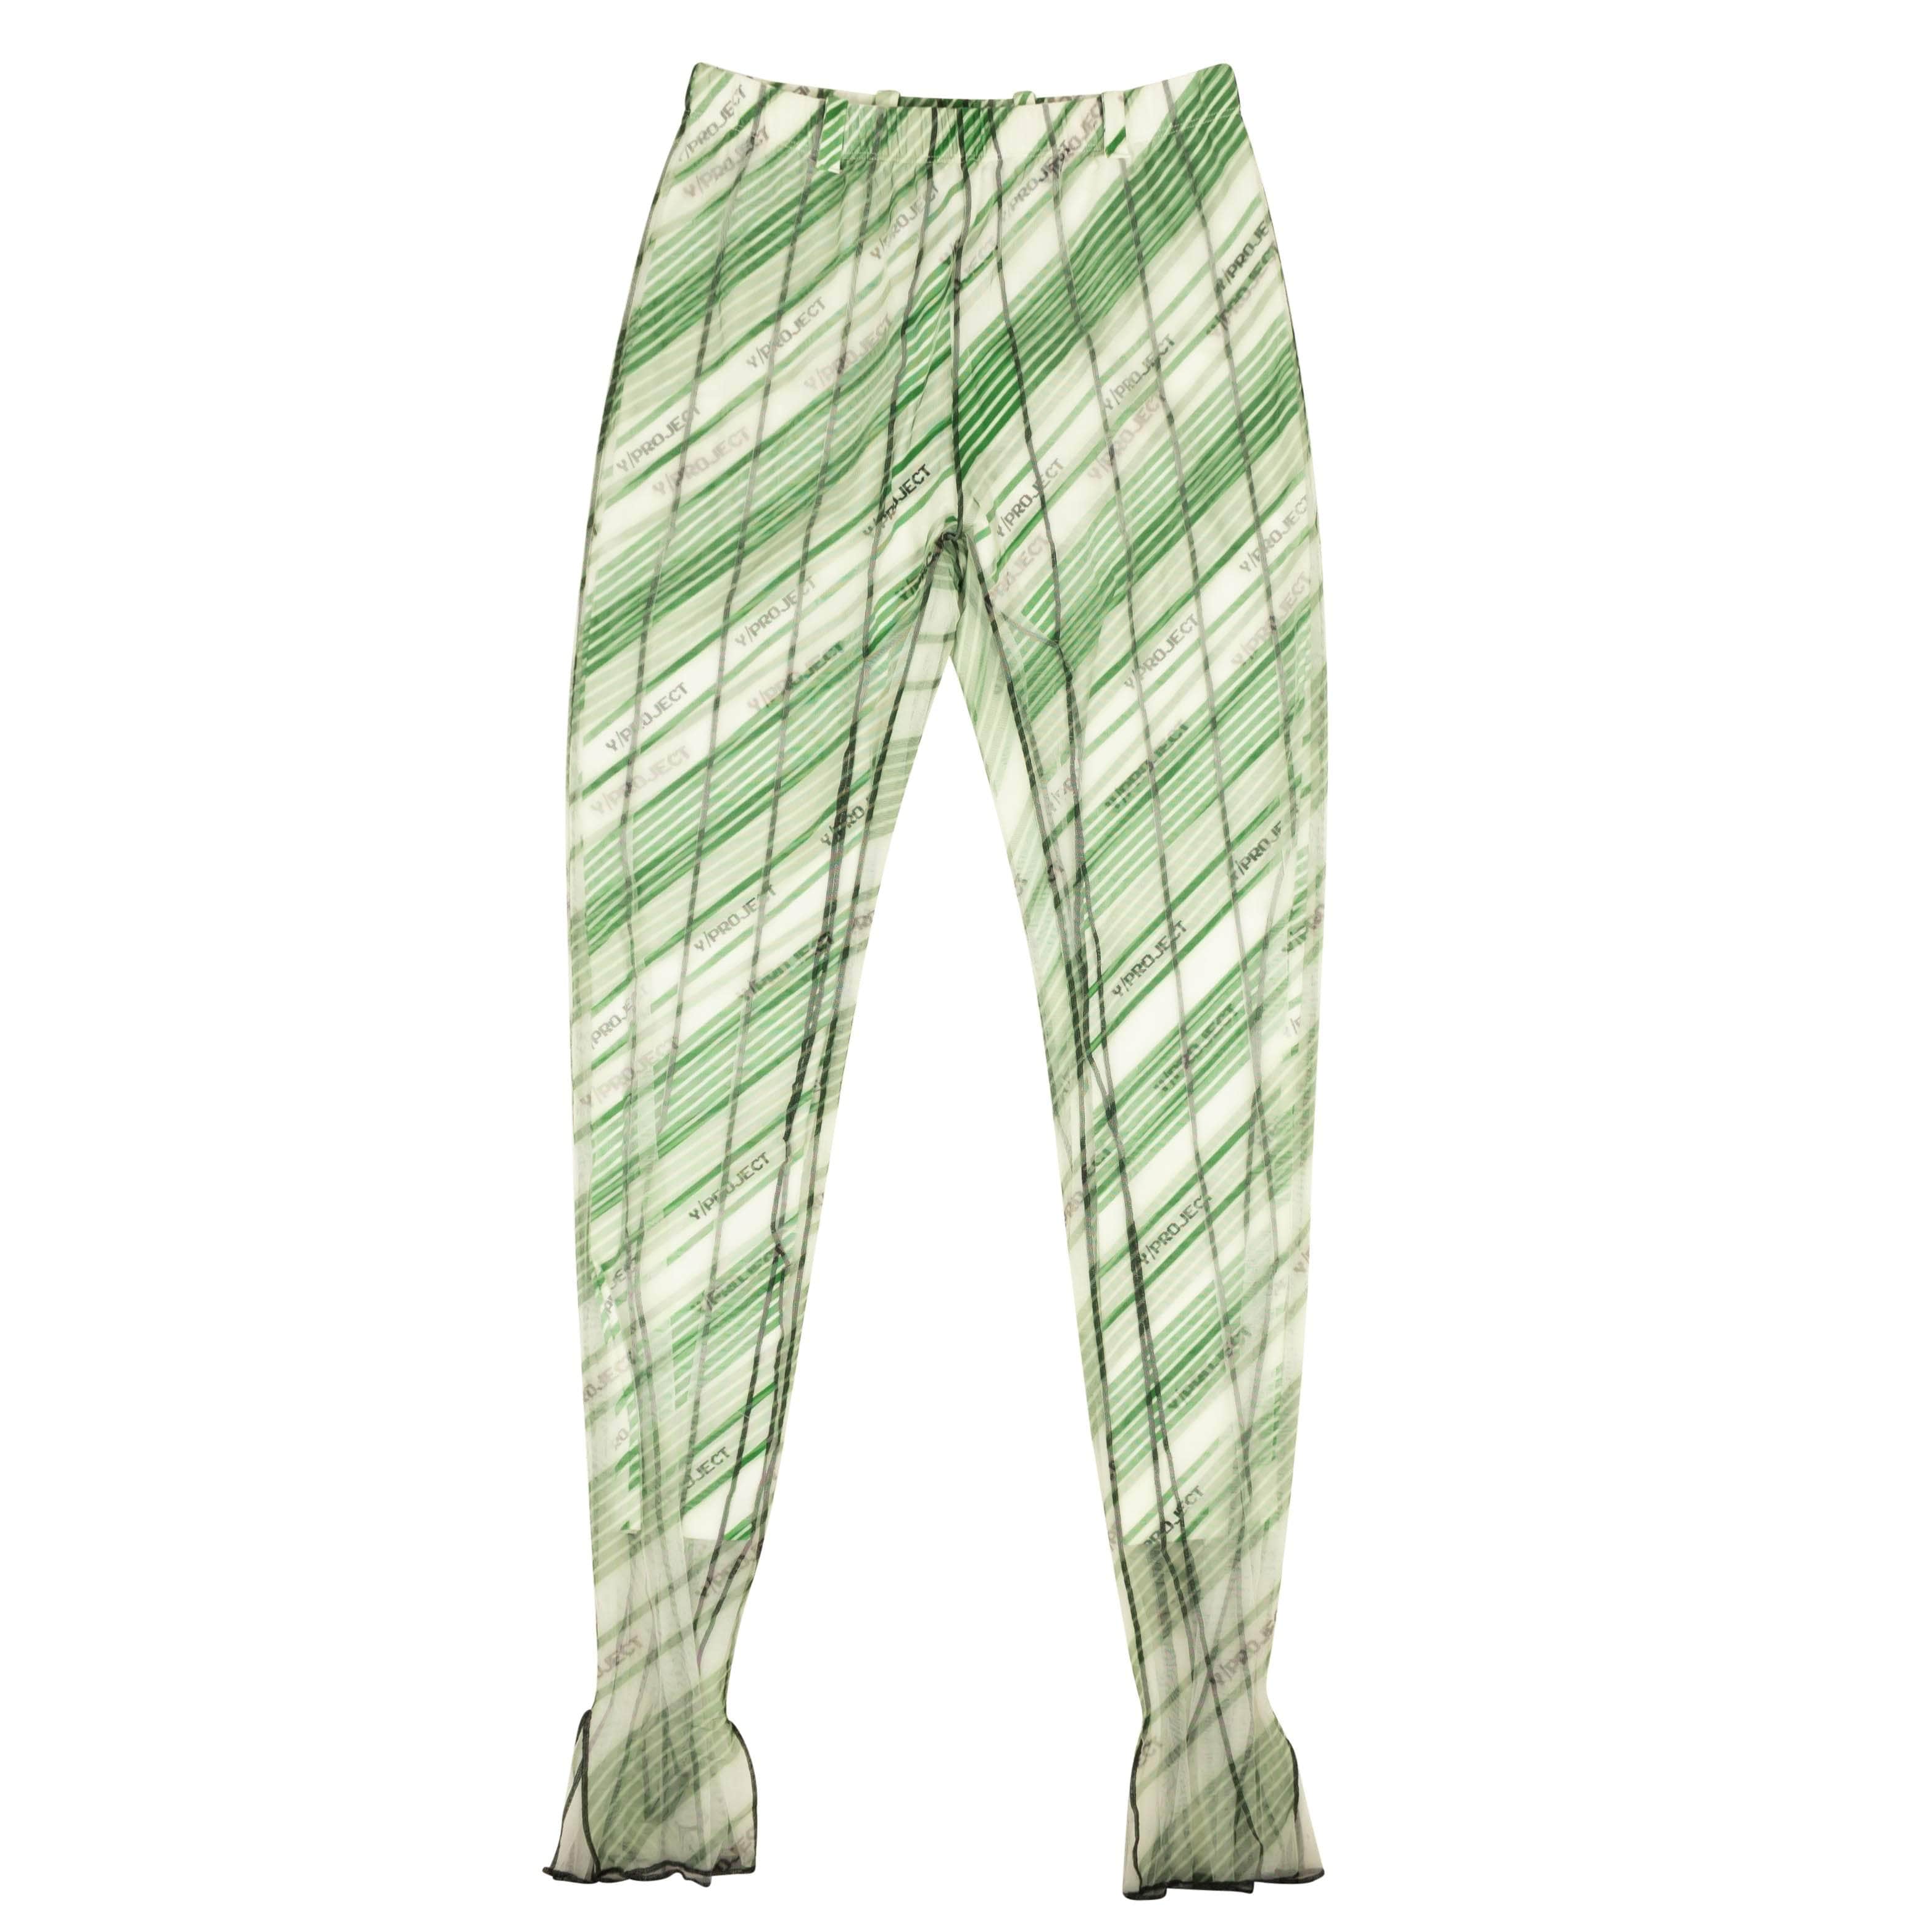 Y/Project 500-750, channelenable-all, chicmi, couponcollection, gender-mens, main-clothing, mens-casual-pants, mens-shoes, MixedApparel, size-m, size-s, y-project M / WPANT52-S18 White Green Fitted Mesh Leggings 95-YPT-1012/M 95-YPT-1012/M